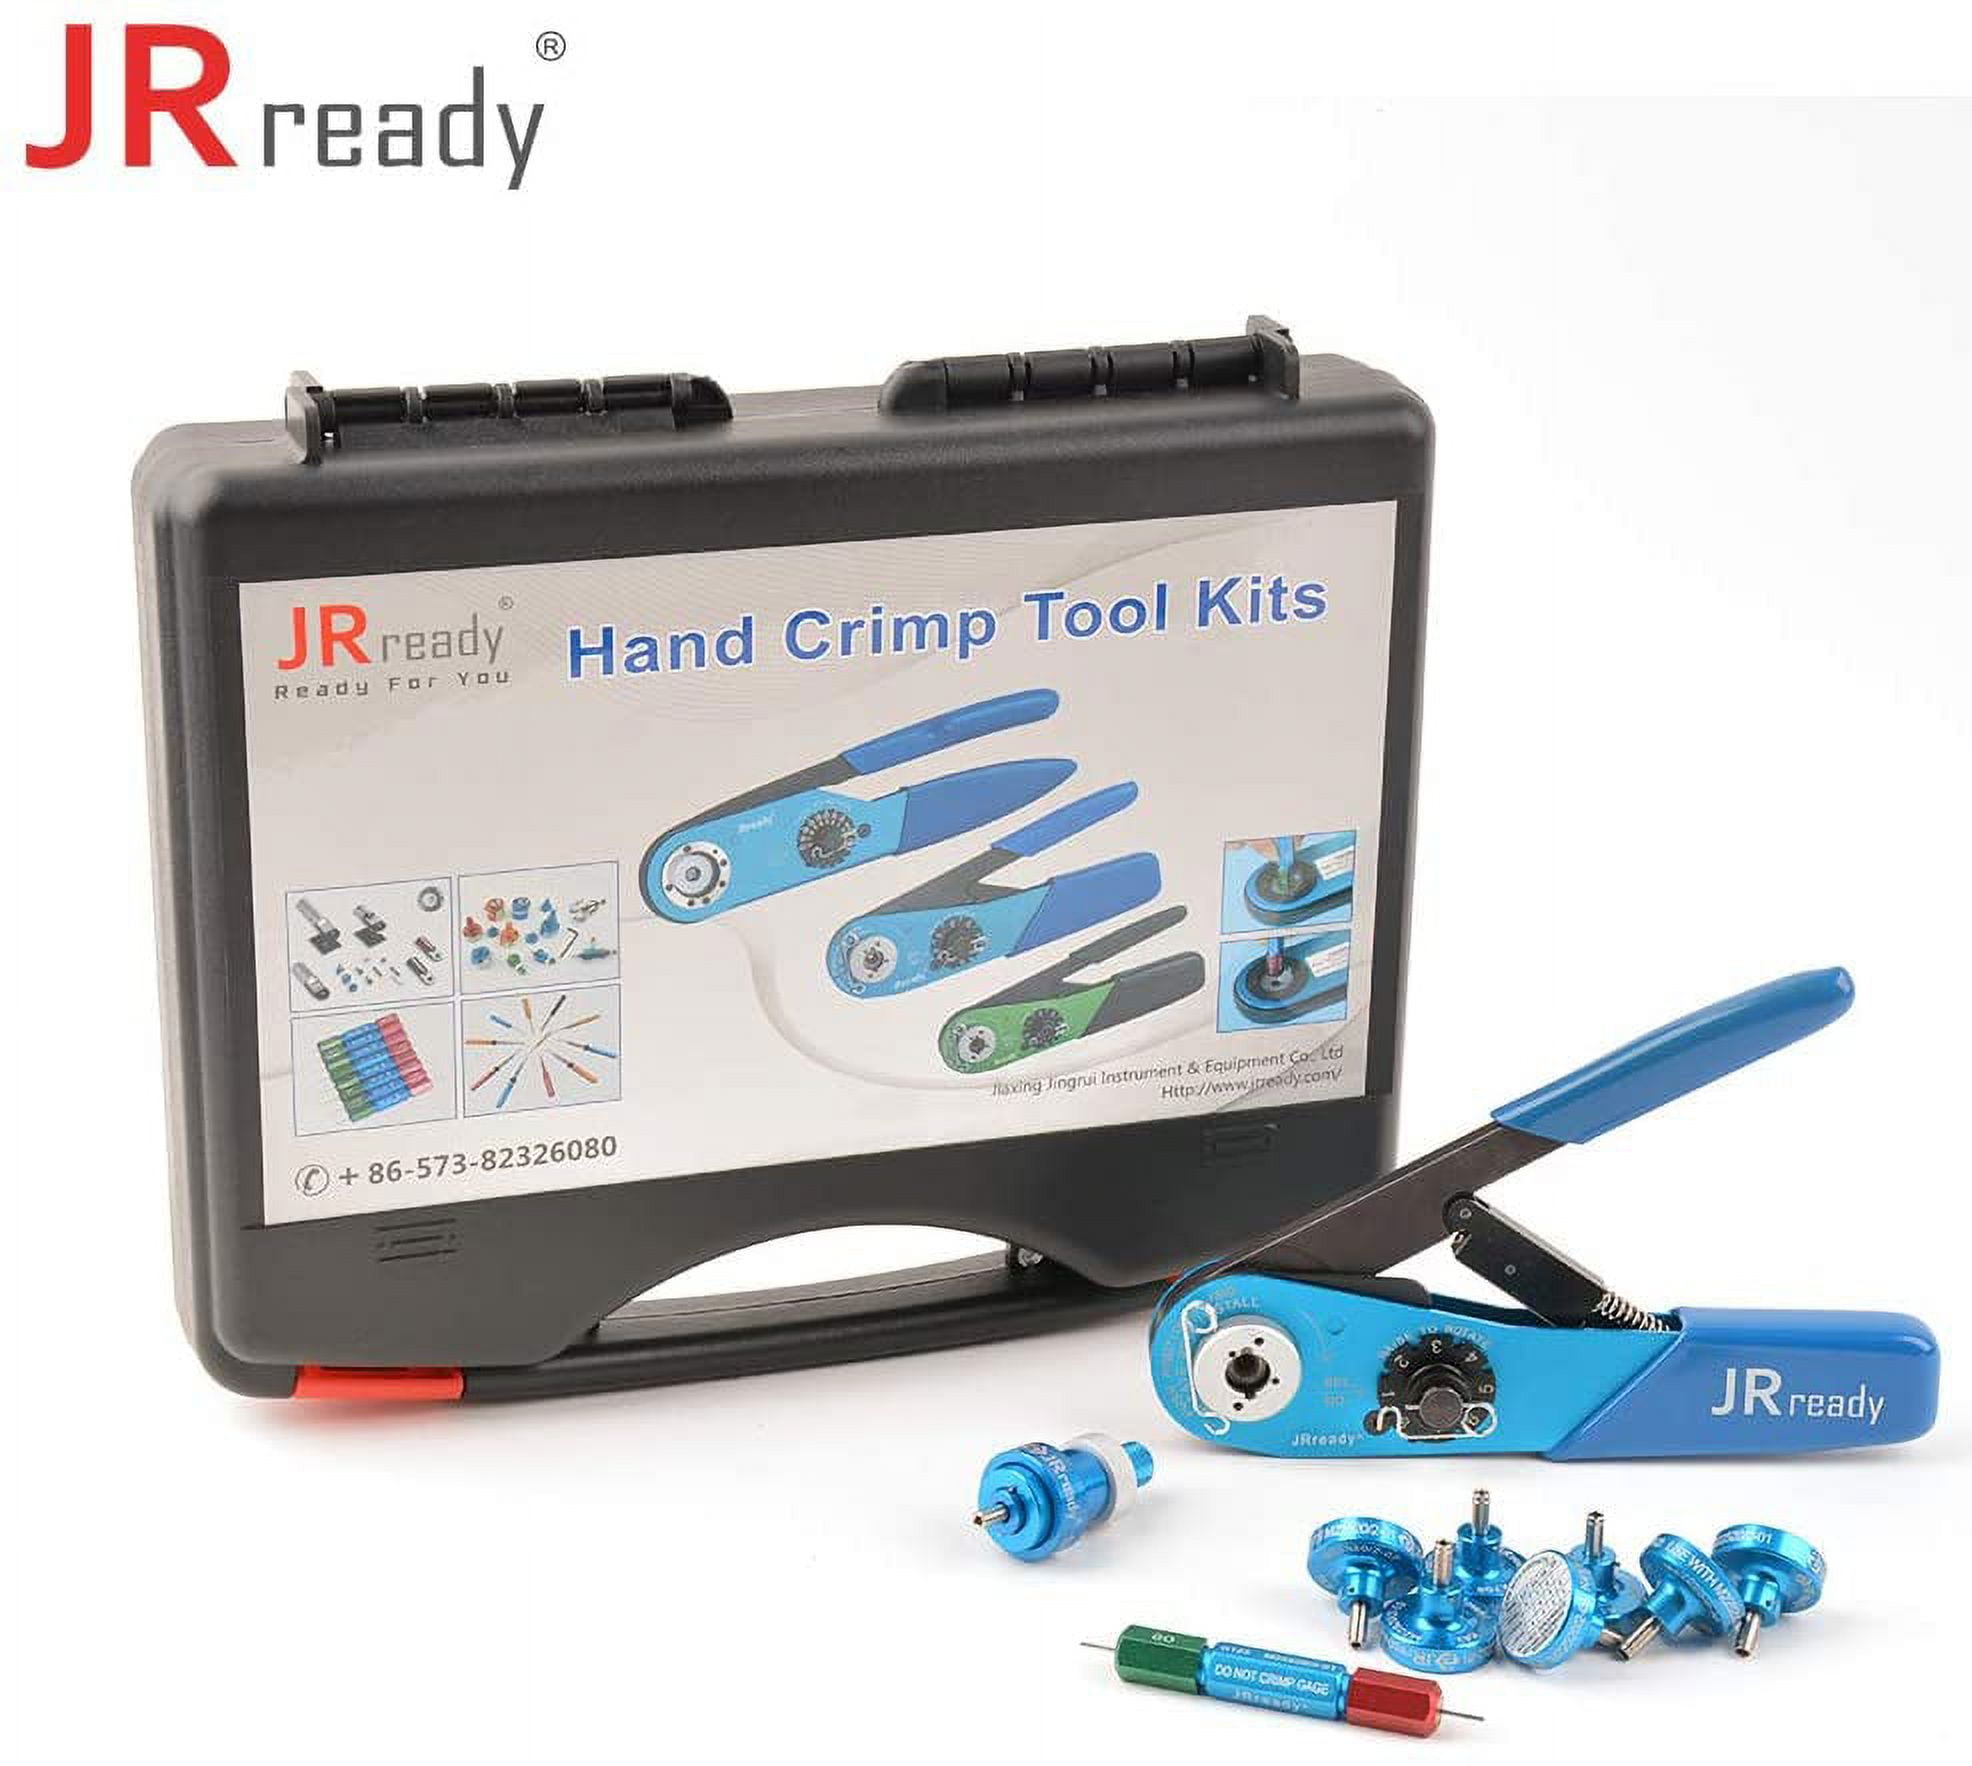 G125 and Contact in and Gauge Positioner Electronic YJQ 615717 Solid for 2 20 Tool Crimper Kit Miniature ST2060 01 M22520 32awg Barrel Connector W1A Crimp Aviation JRready of Systems Indent 7